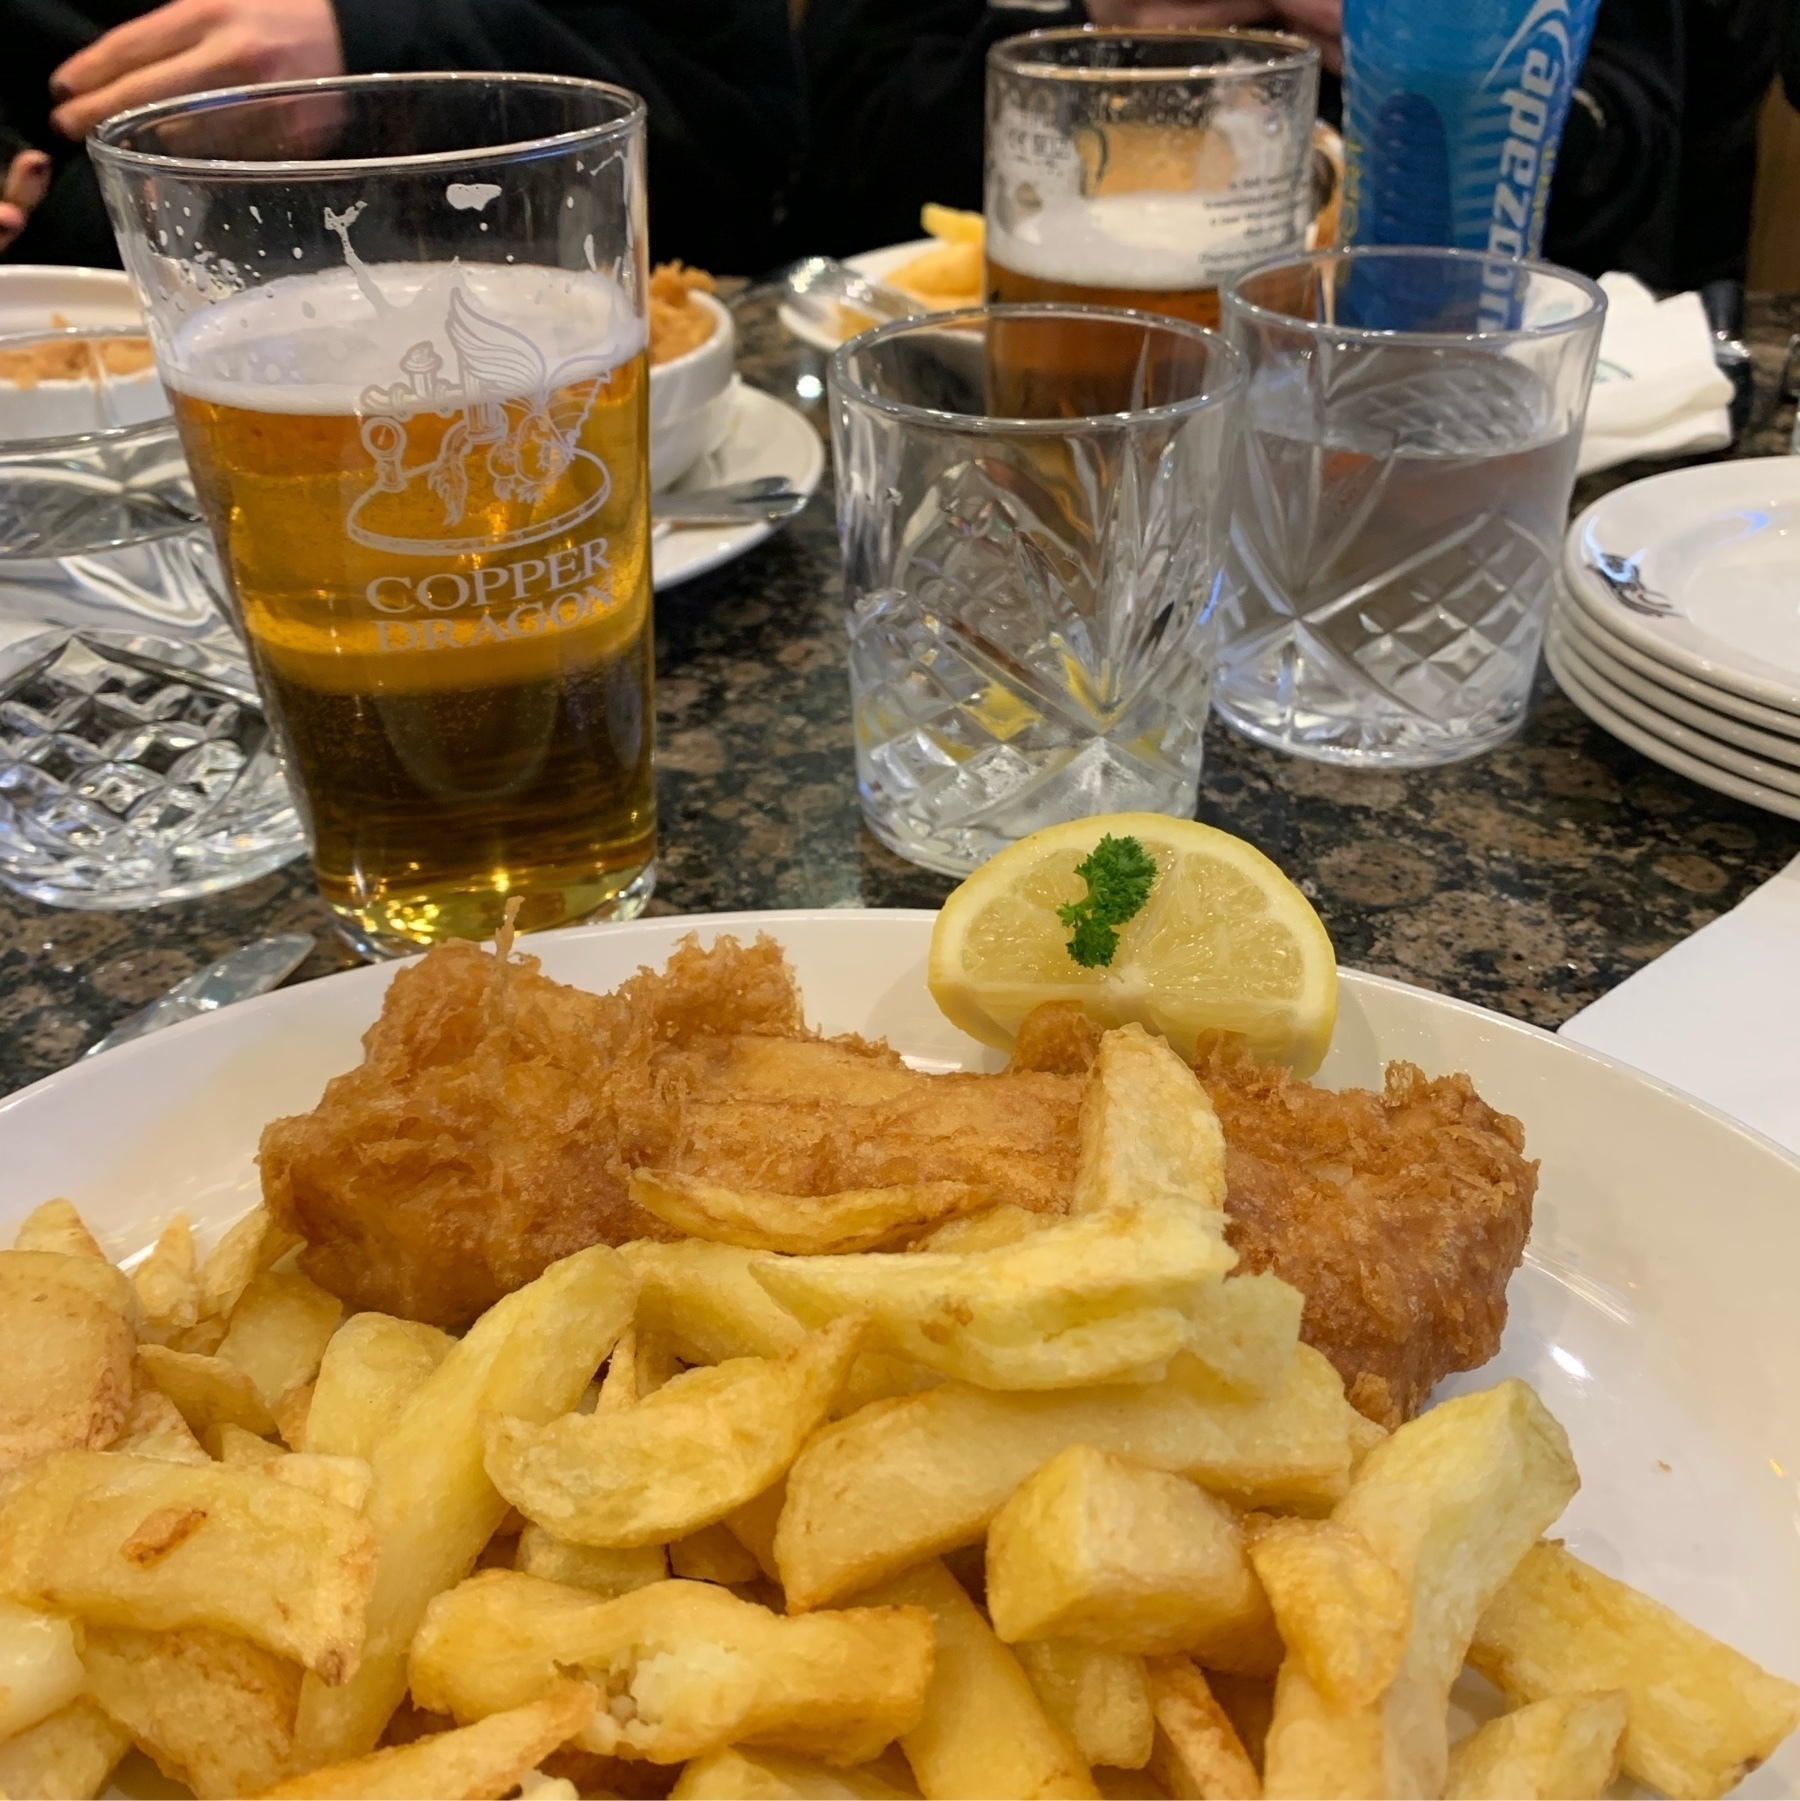 Plate of fish and chips in foreground with pint of beer behind